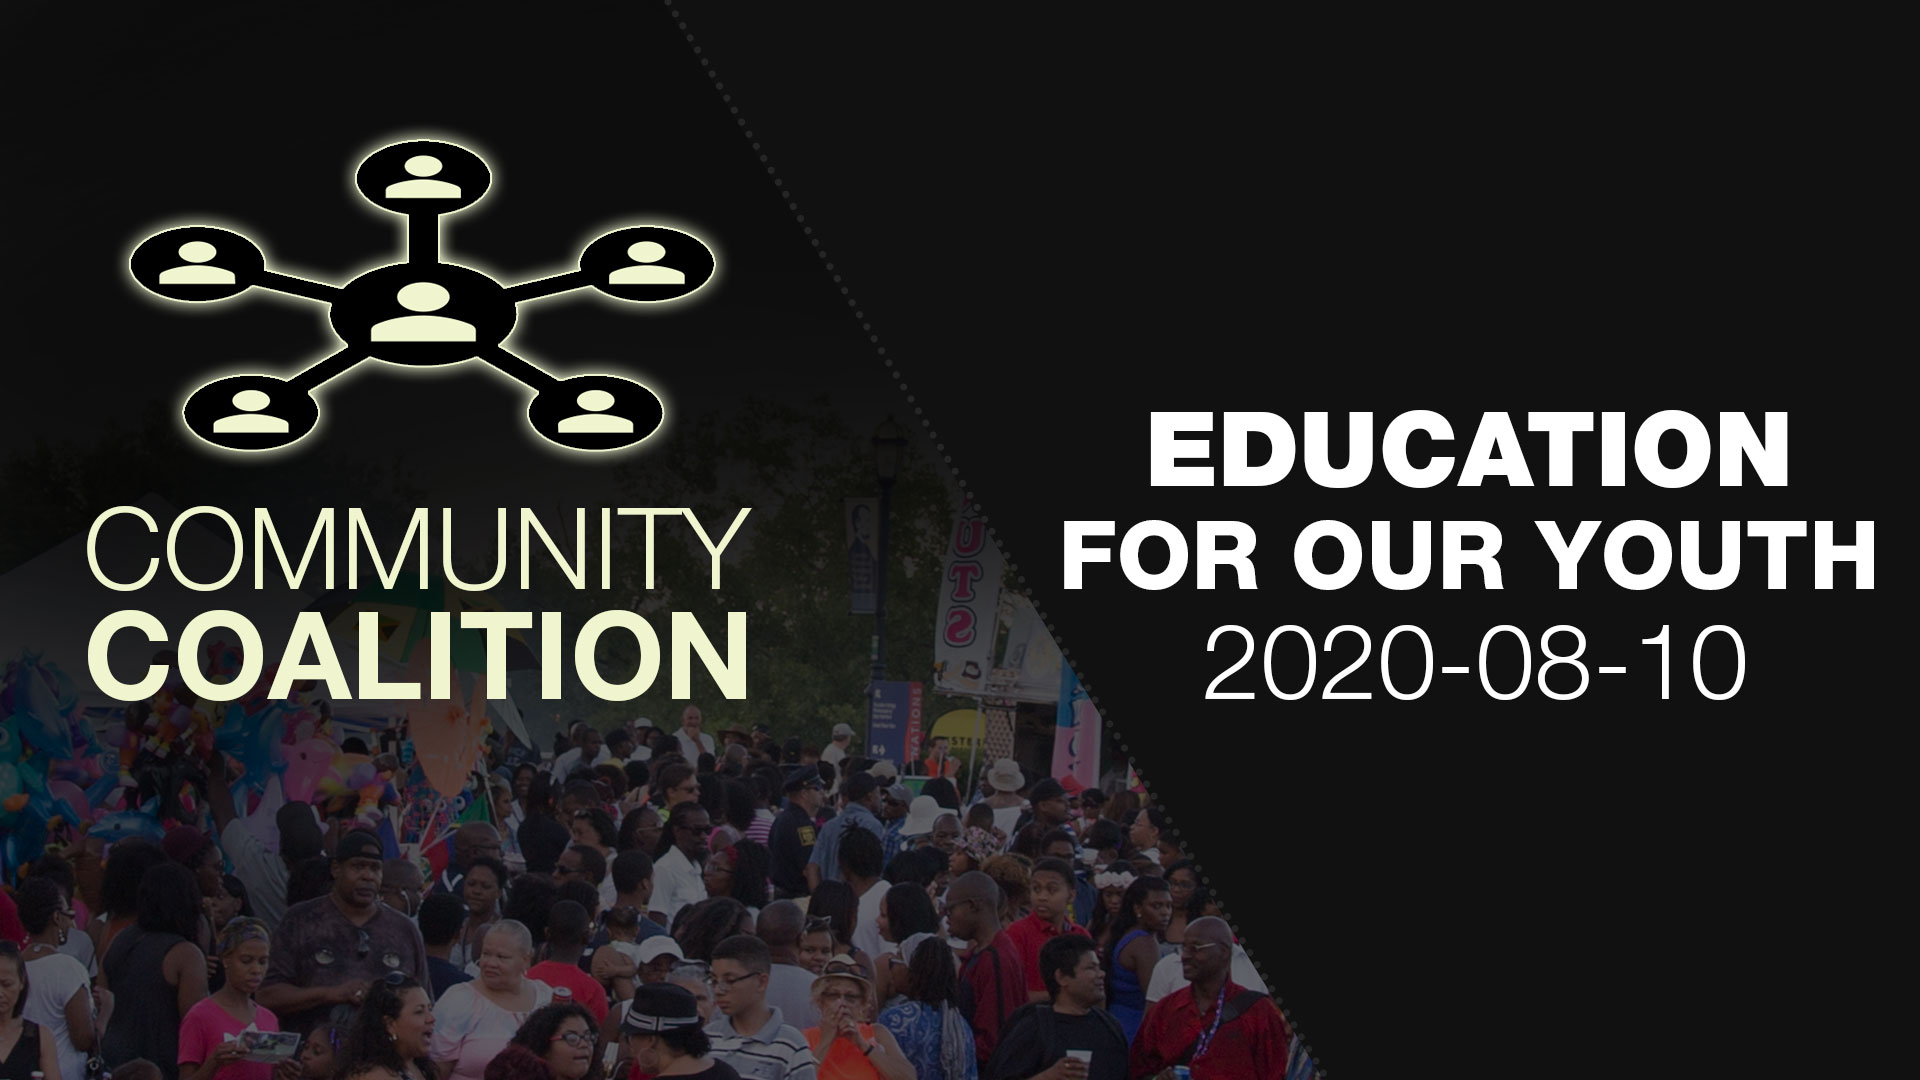 Education for our Youth - COMMUNITY COALITION - Virtual Zoom Segment